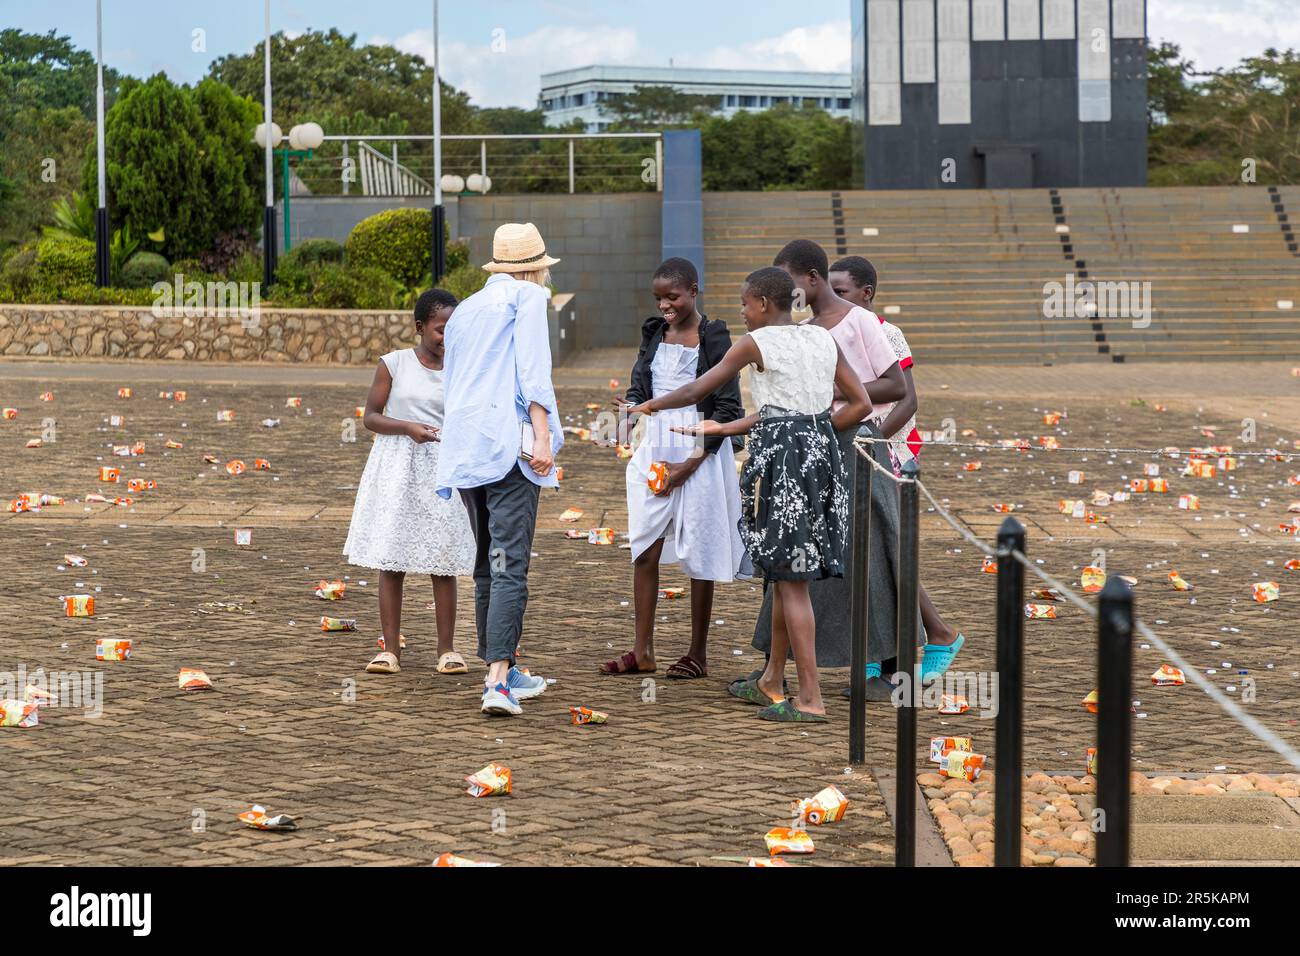 Girls collect plastic rings from tetra packs to make jewelry after a rally in front of the Memorial War Tower in Lilongwe. Young girls collect the cap rings of the maheu packs discarded on the national holiday in honor of Malawi's first president (Hastings Kamuzu Banda) to make jewelry. Maheu or Mahewu is a typical drink in Malawi made from fermented maize. Lilongwe, Malawi Stock Photo